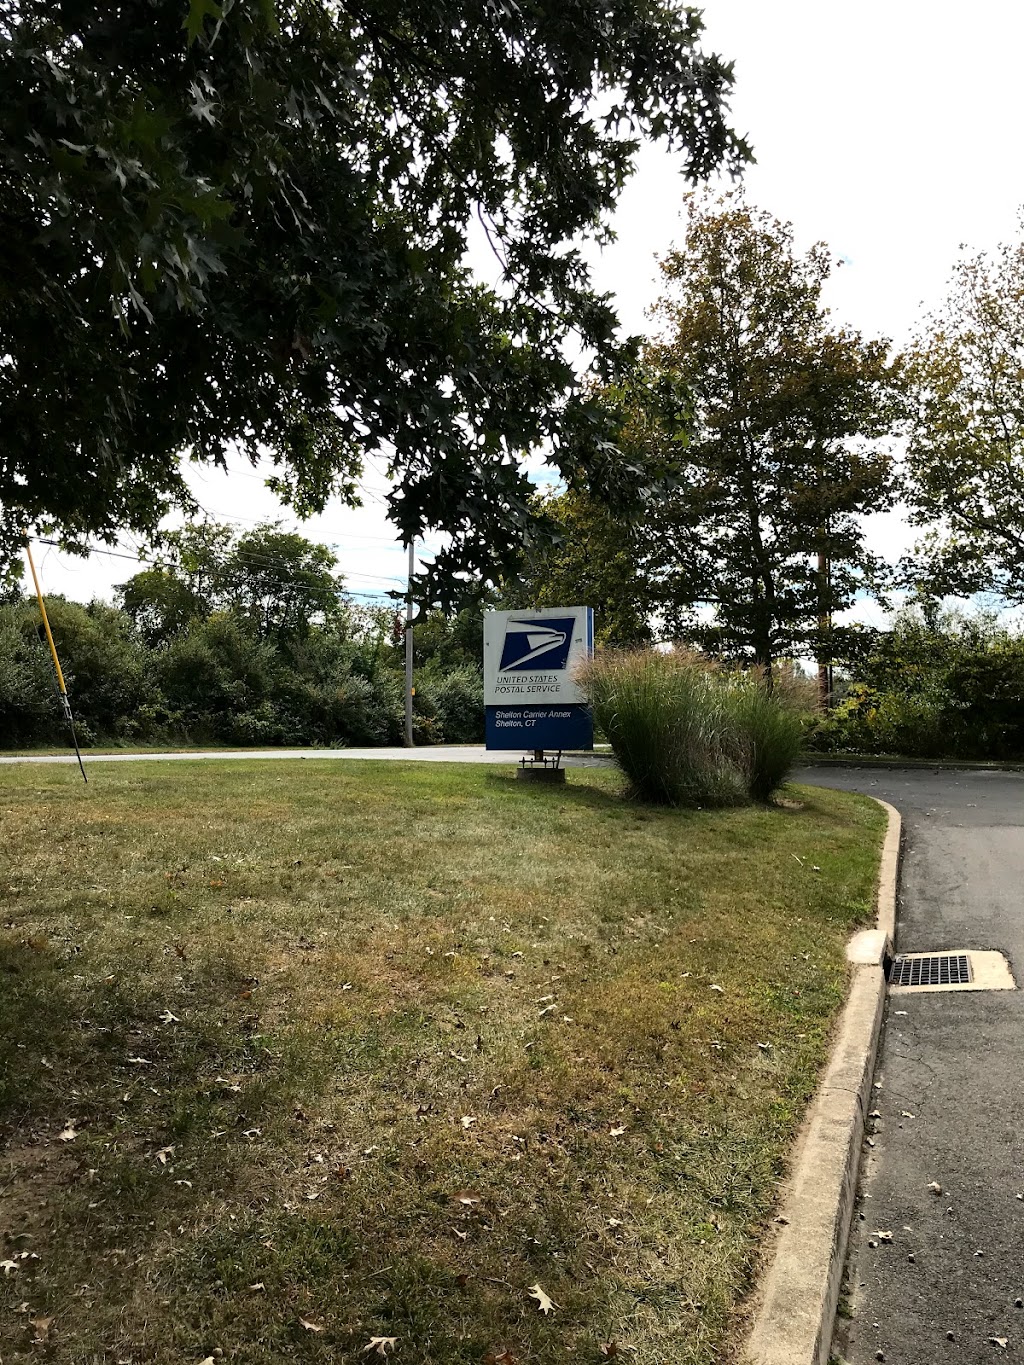 US Post Office | 40 Forest Pkwy, Shelton, CT 06484 | Phone: (203) 922-7720